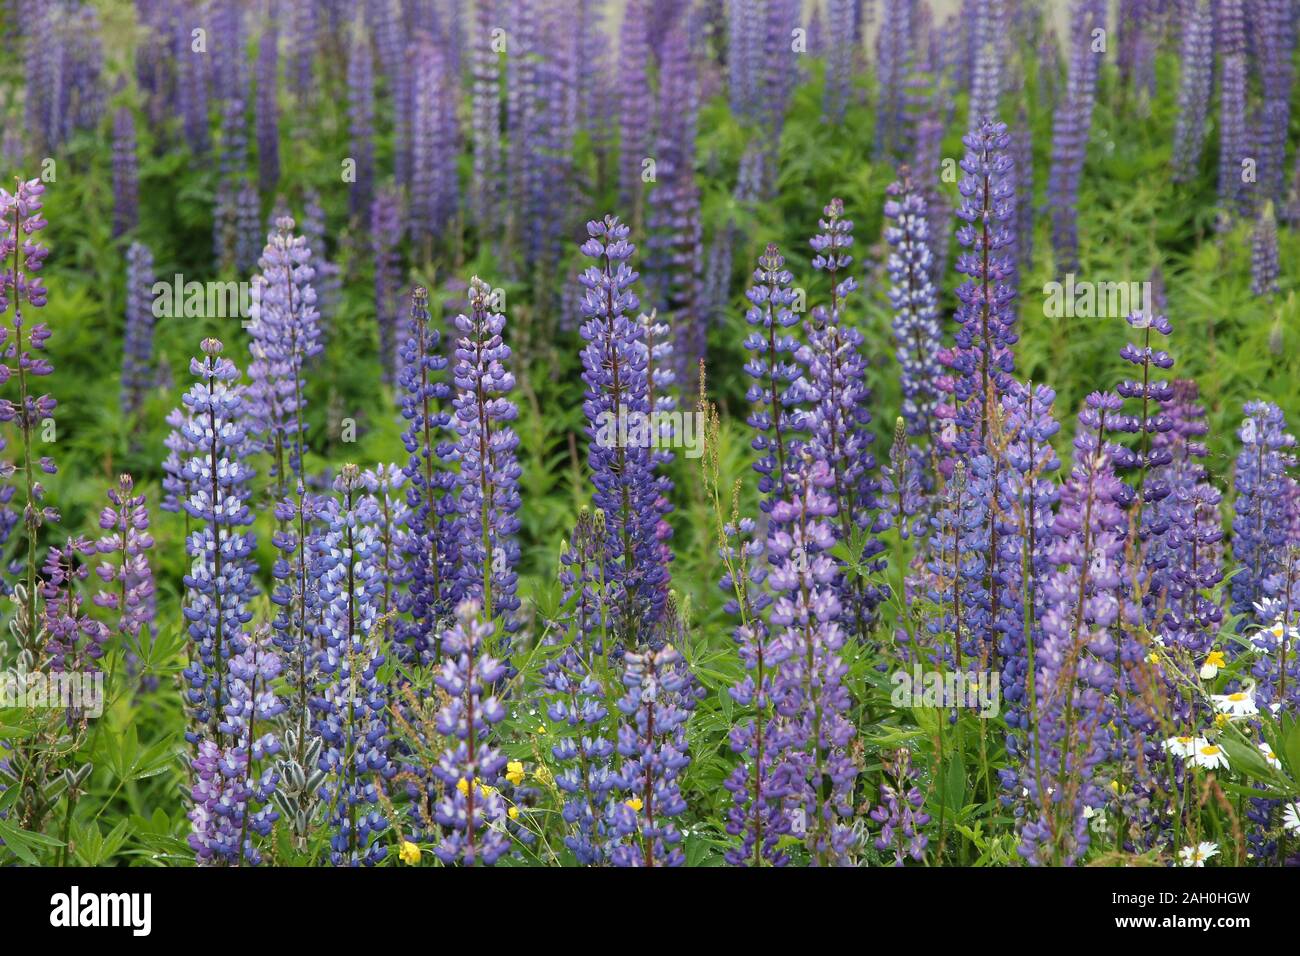 Lupine flowers in Norway. Herbaceous perennial plant in the legume family, Fabaceae. Stock Photo